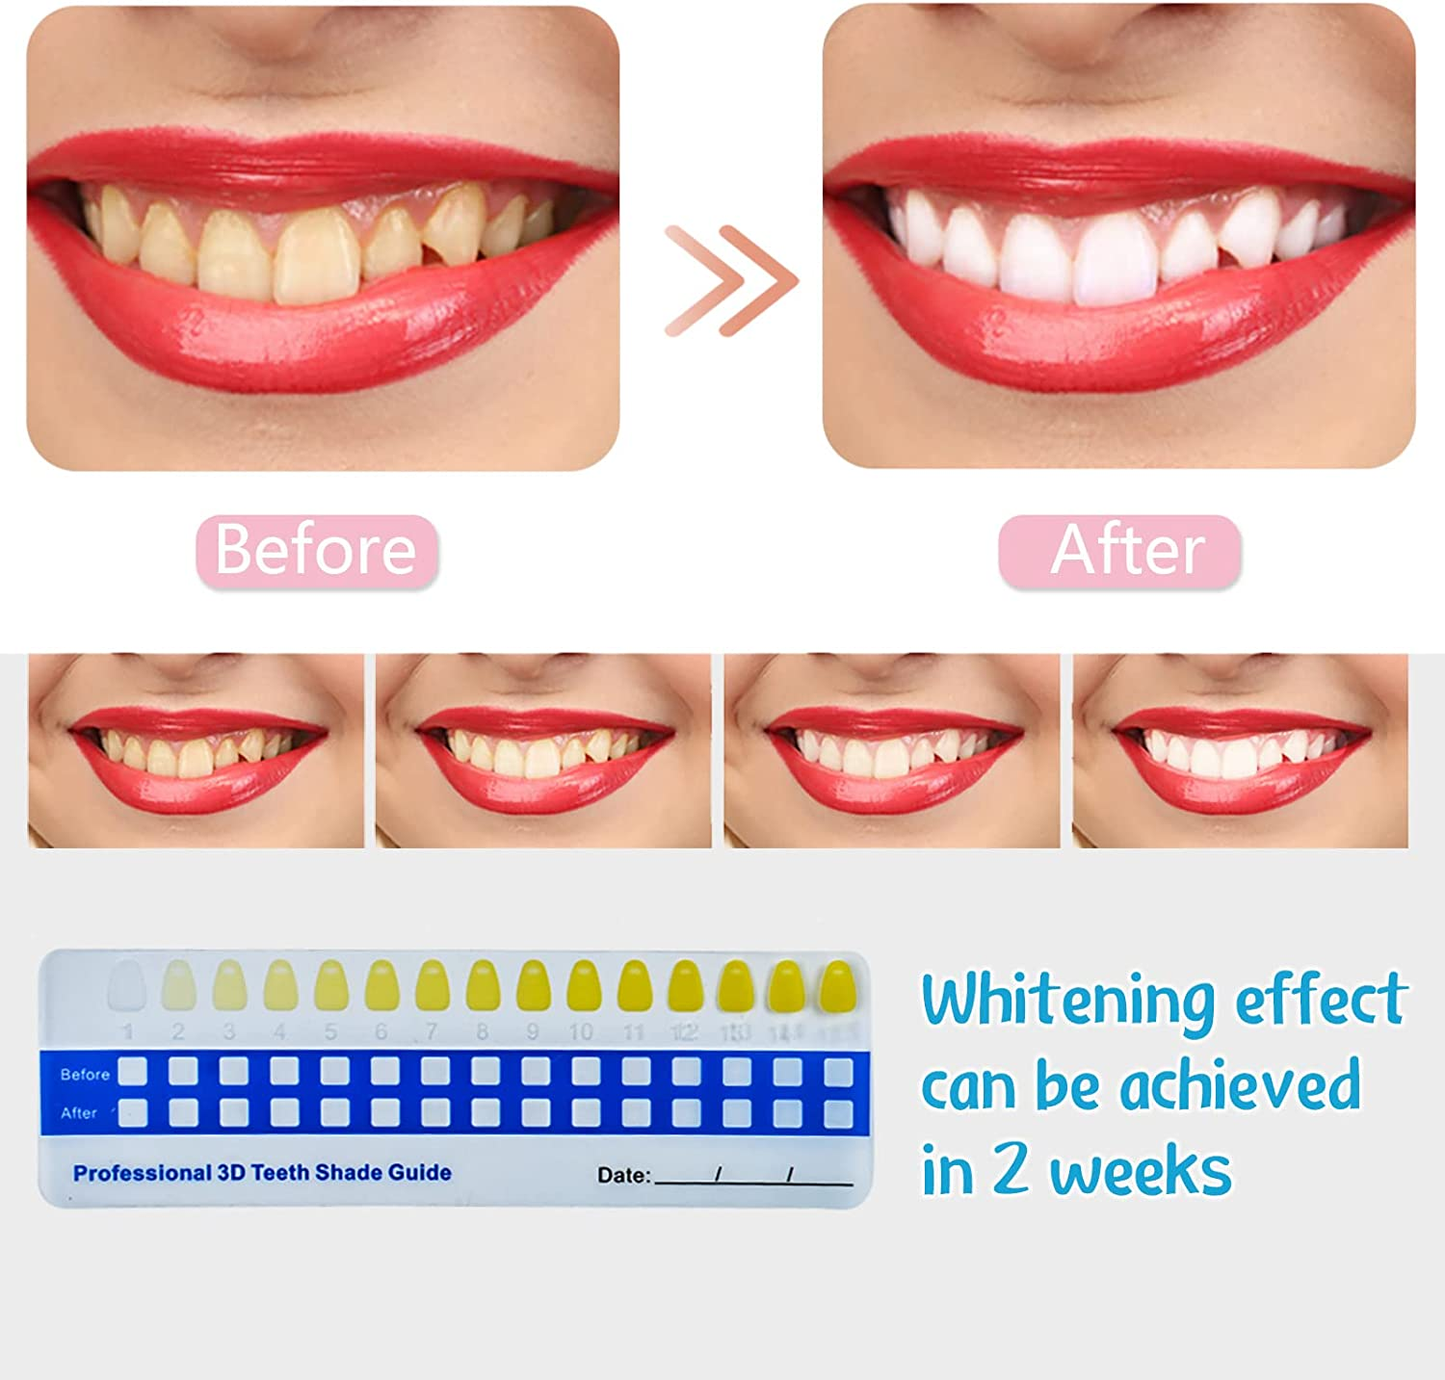 Teeth Whitening Kit with Blue Led Light, Professional Tooth Whitener with 4 Pcs Non-Sensitive Whitening Gel Pens, 2 Weeks Can Effectively Reduce Yellow Teeth Stains Caused by Coffee/Wine/Smoking.